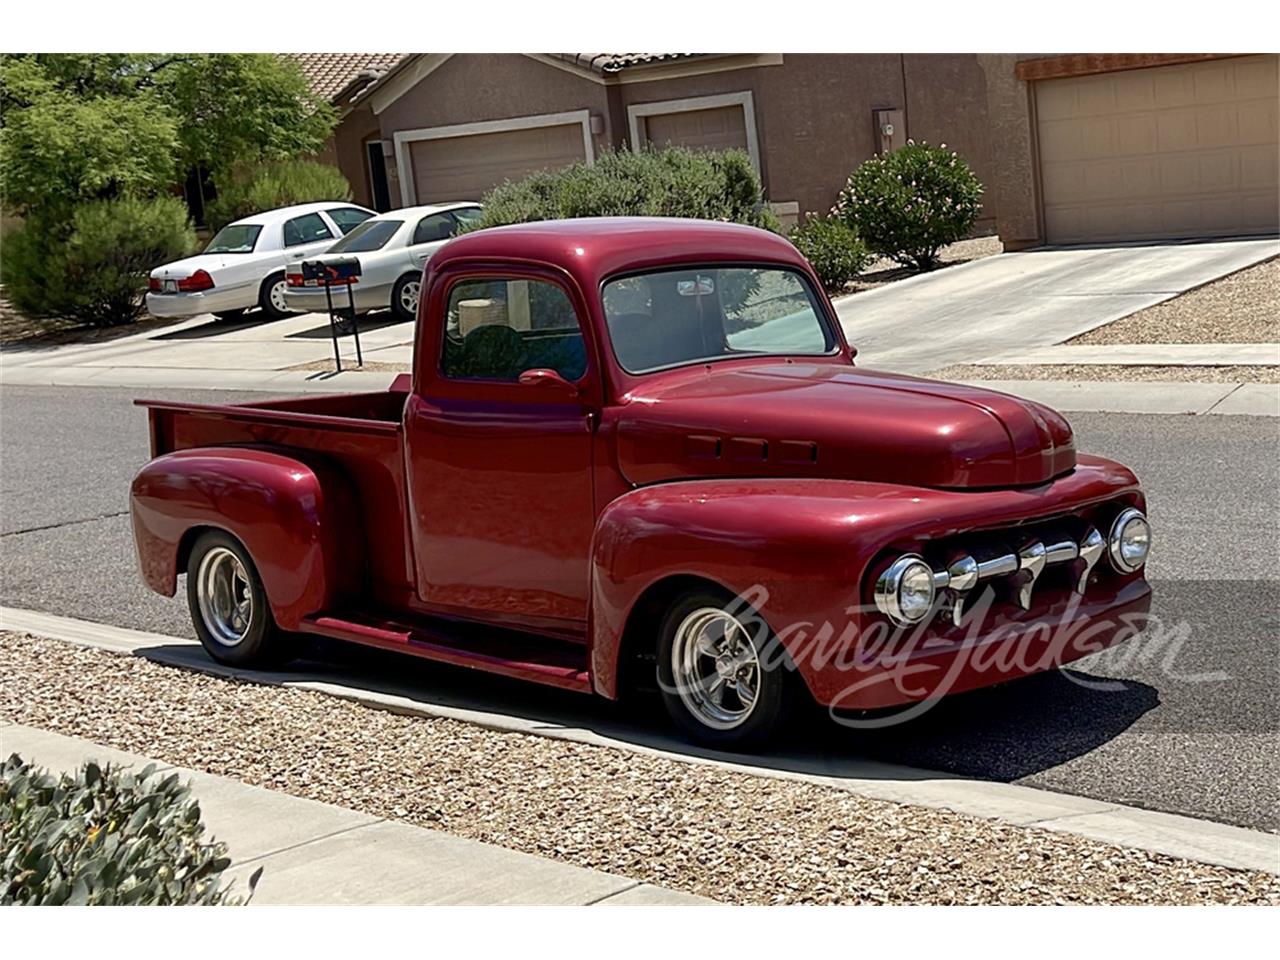 For Sale at Auction: 1950 Ford F100 in Scottsdale, Arizona for sale in Scottsdale, AZ